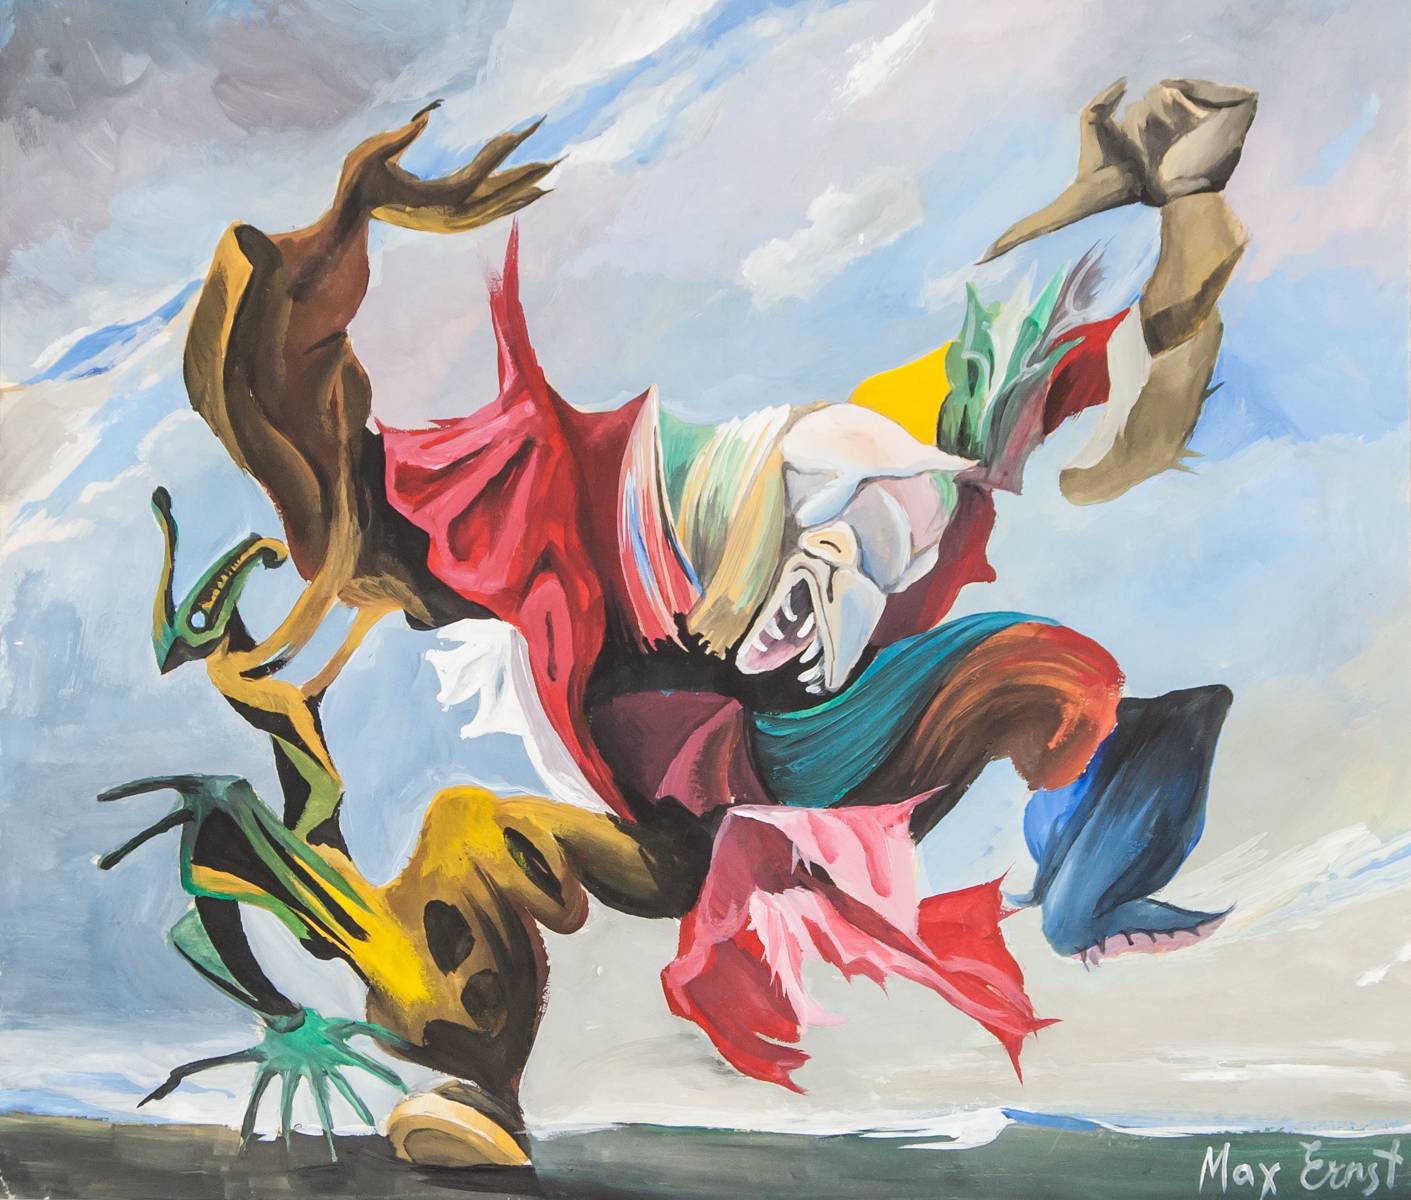 Max Ernst German Surrealist Oil on Paper for Auction at on June 20